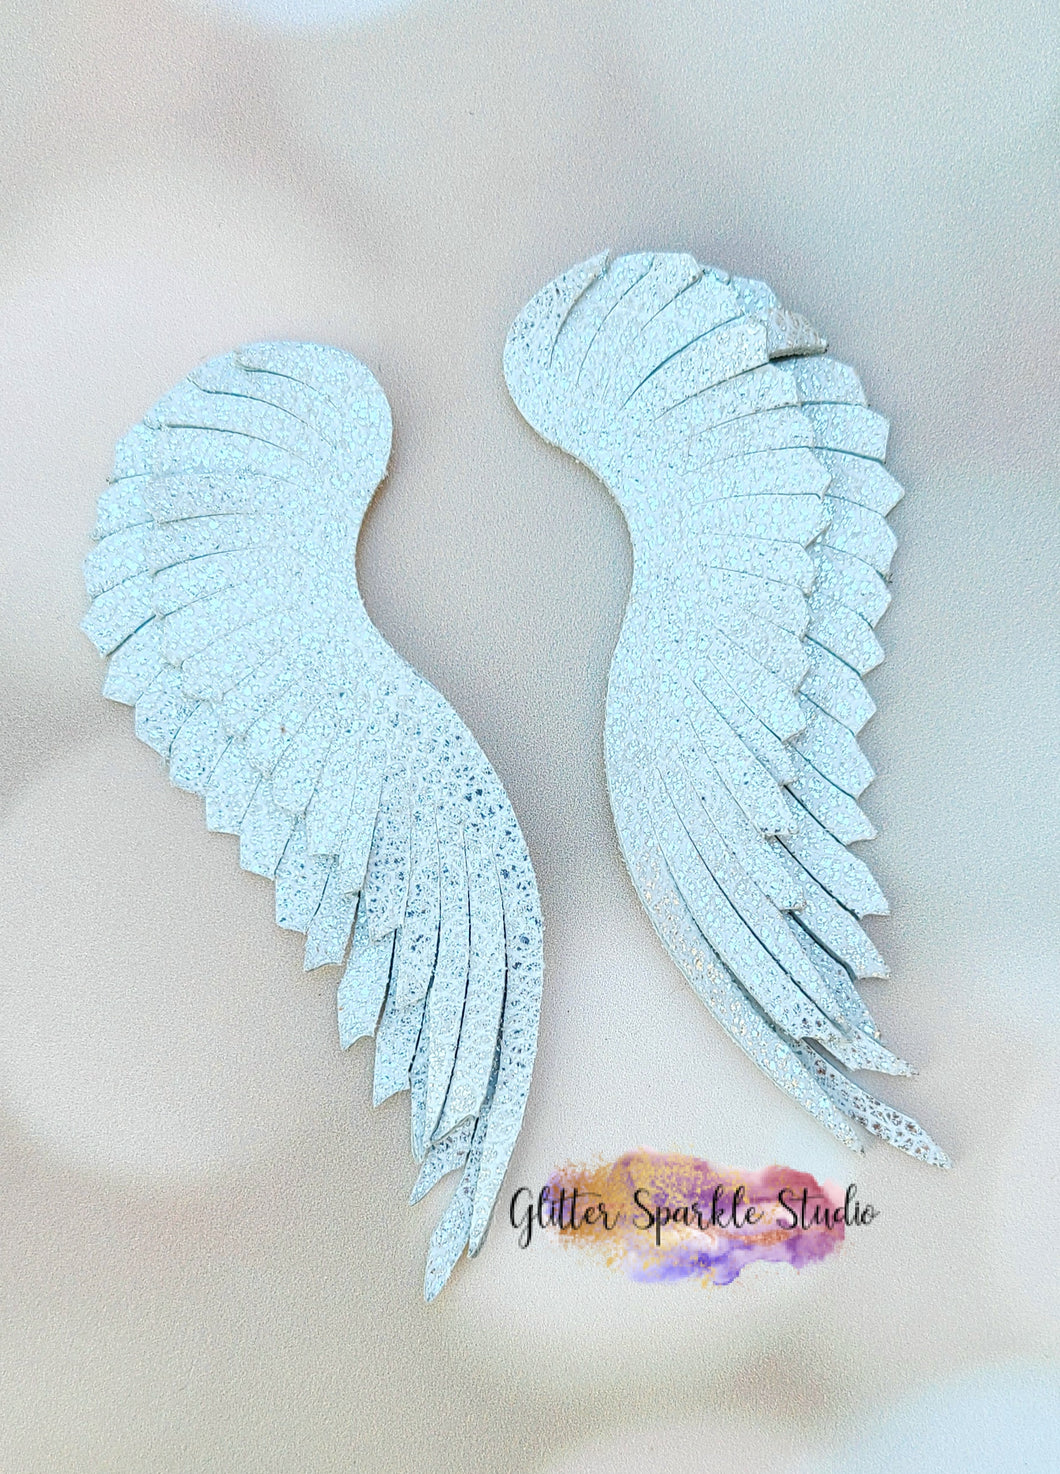 Adapted Top 4 inch Double Layer Angel Wings Fringe Feathers Earring or Pendant Steel Rule Combo Die